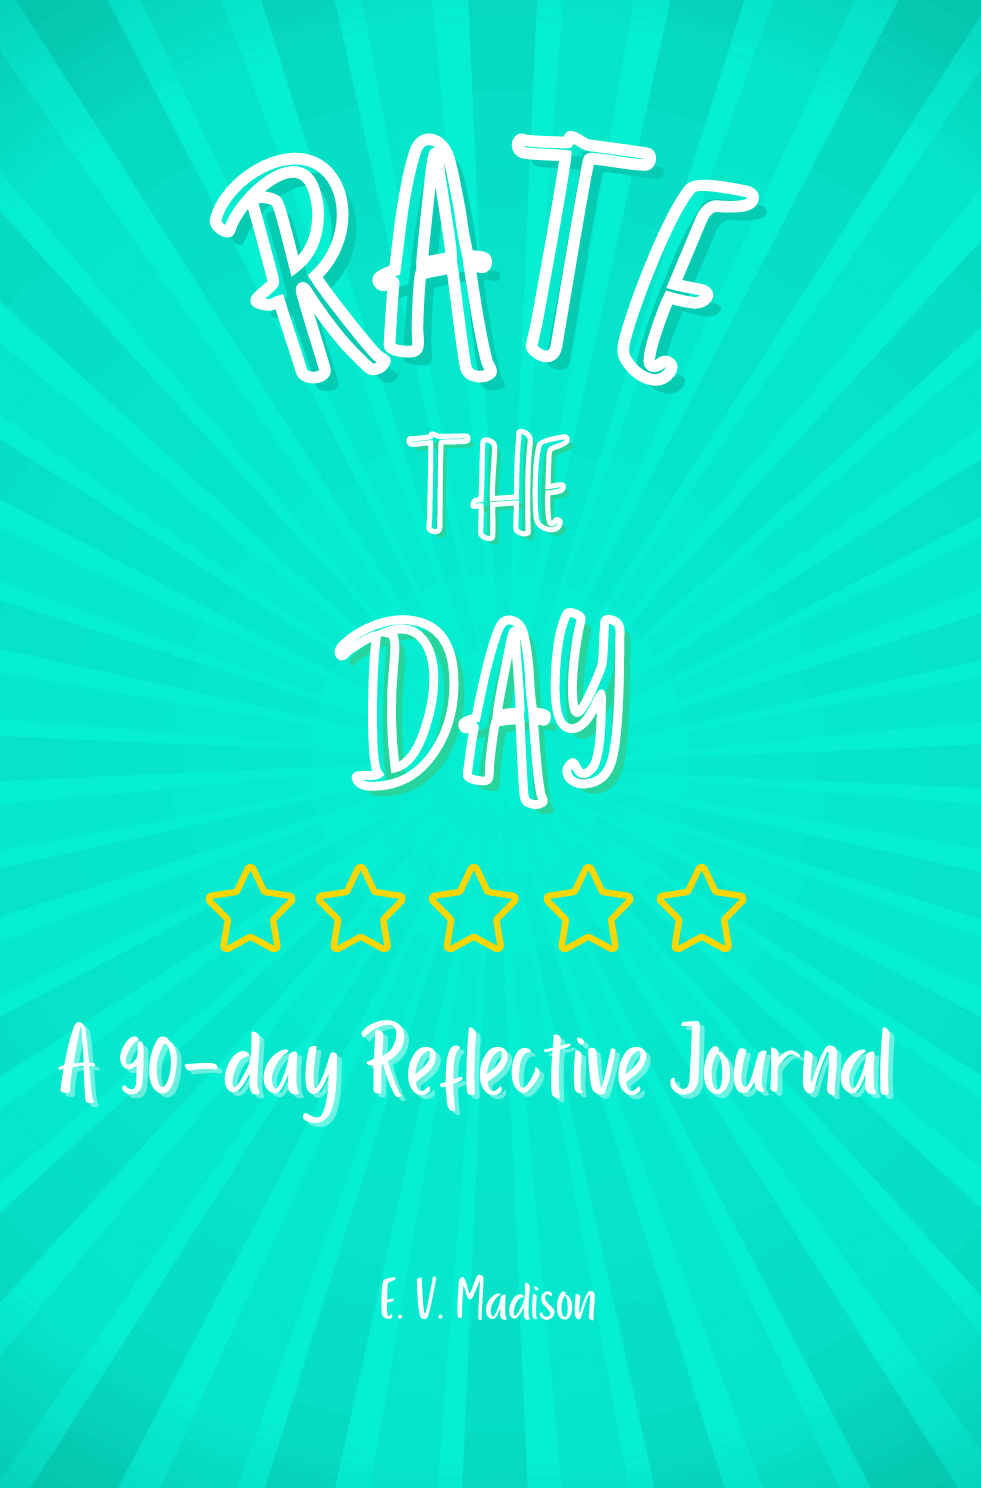 Rate the Day: A 90-Day Reflective Journal - Mint Green Edition